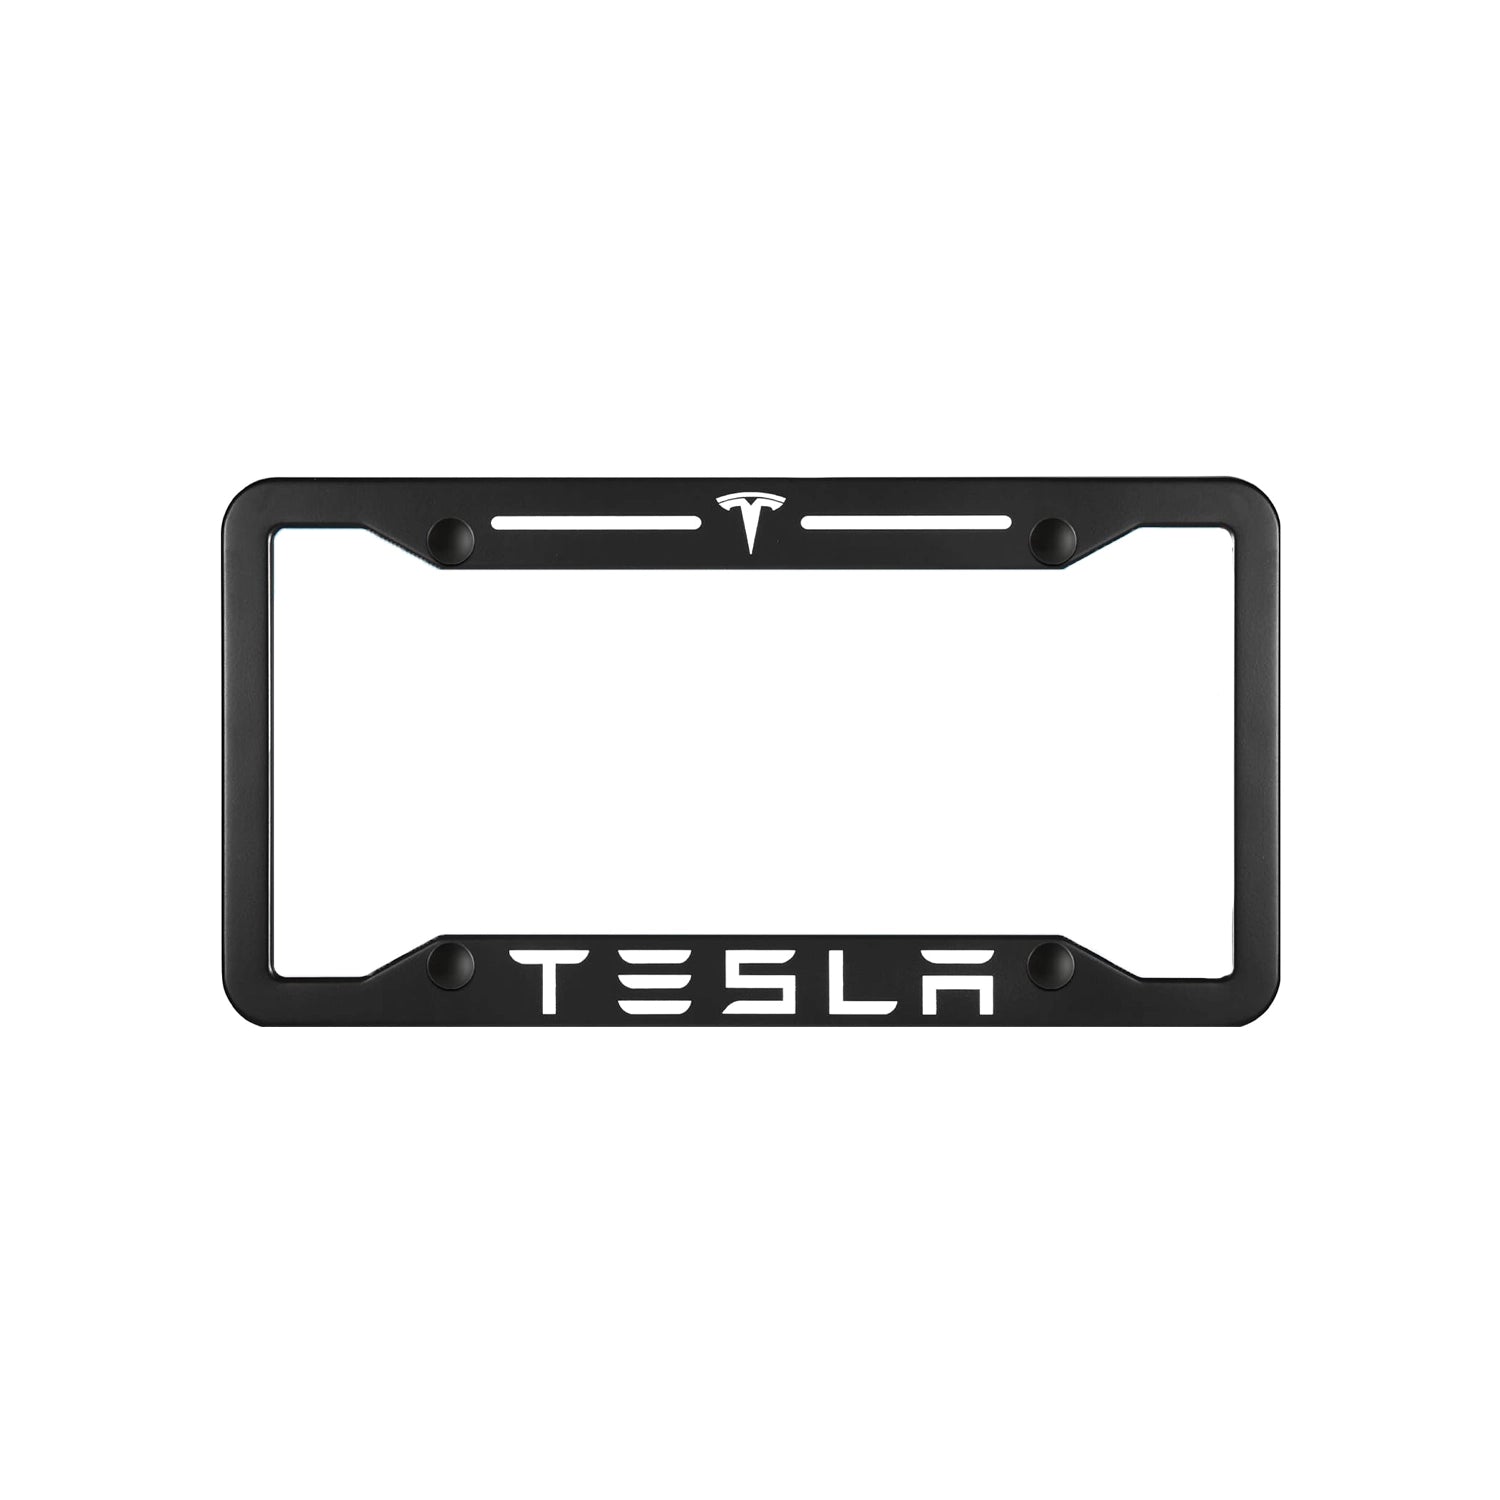 Adreama Tesla License Plate Frame Cover, 2 pack (Ships Within 5-7 Days)